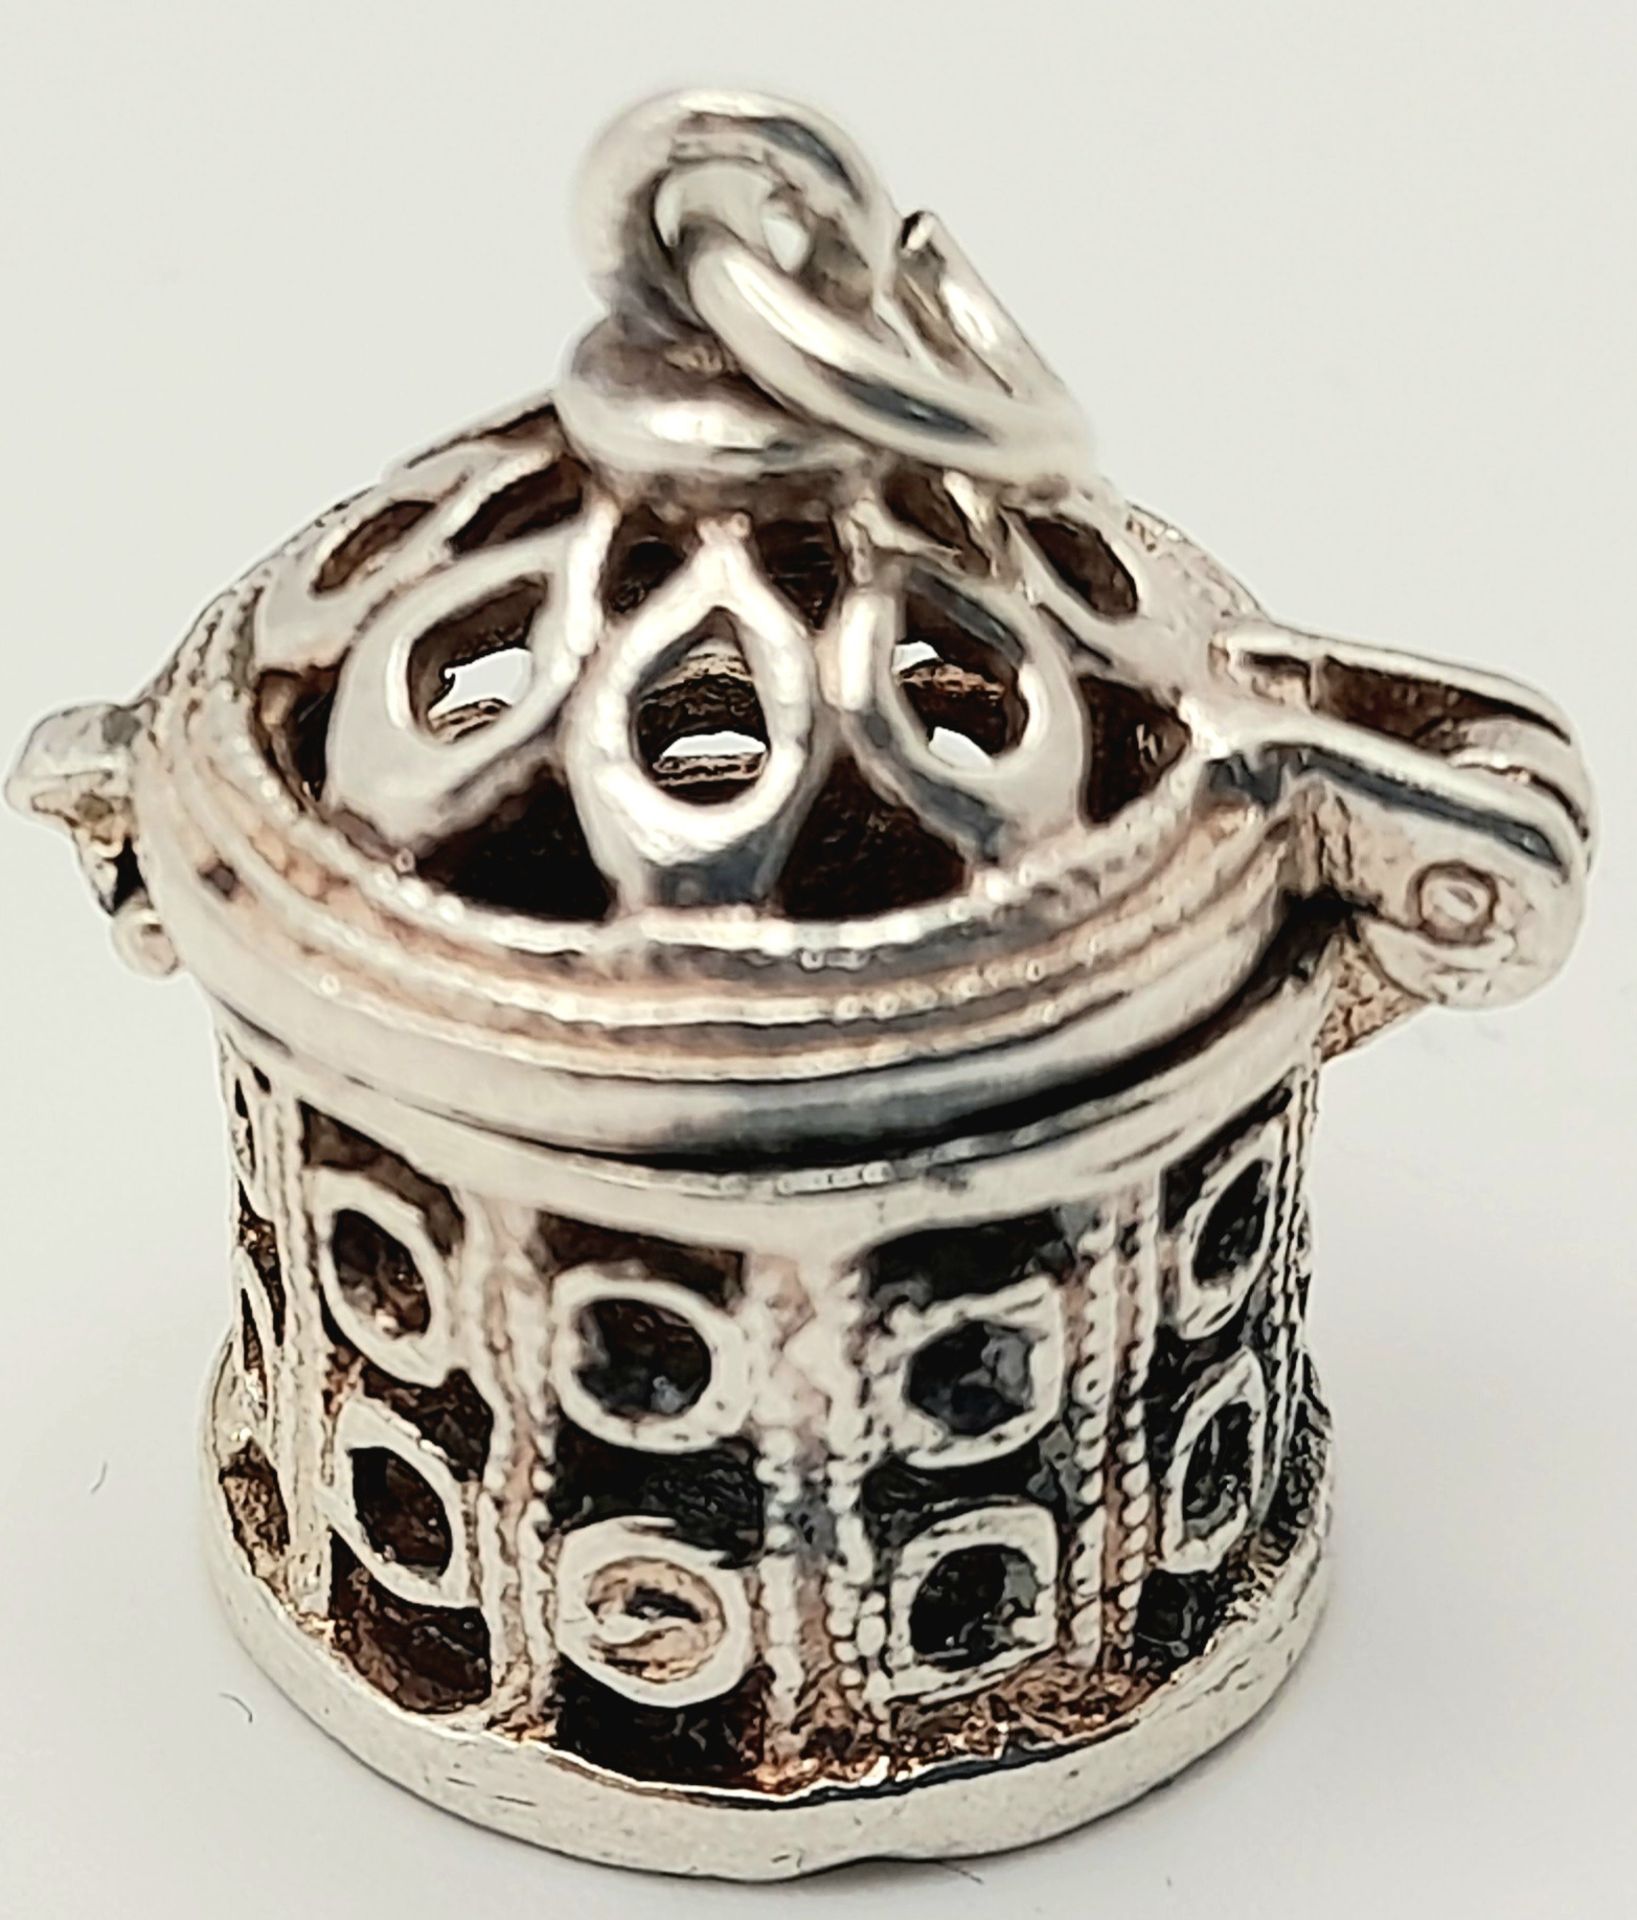 A STERLING SILVER ASPIRIN TABLET BOX CHARM ENGRAVED WITH THE WORD ASPIRINS, WHICH OPENS. 2.2cm